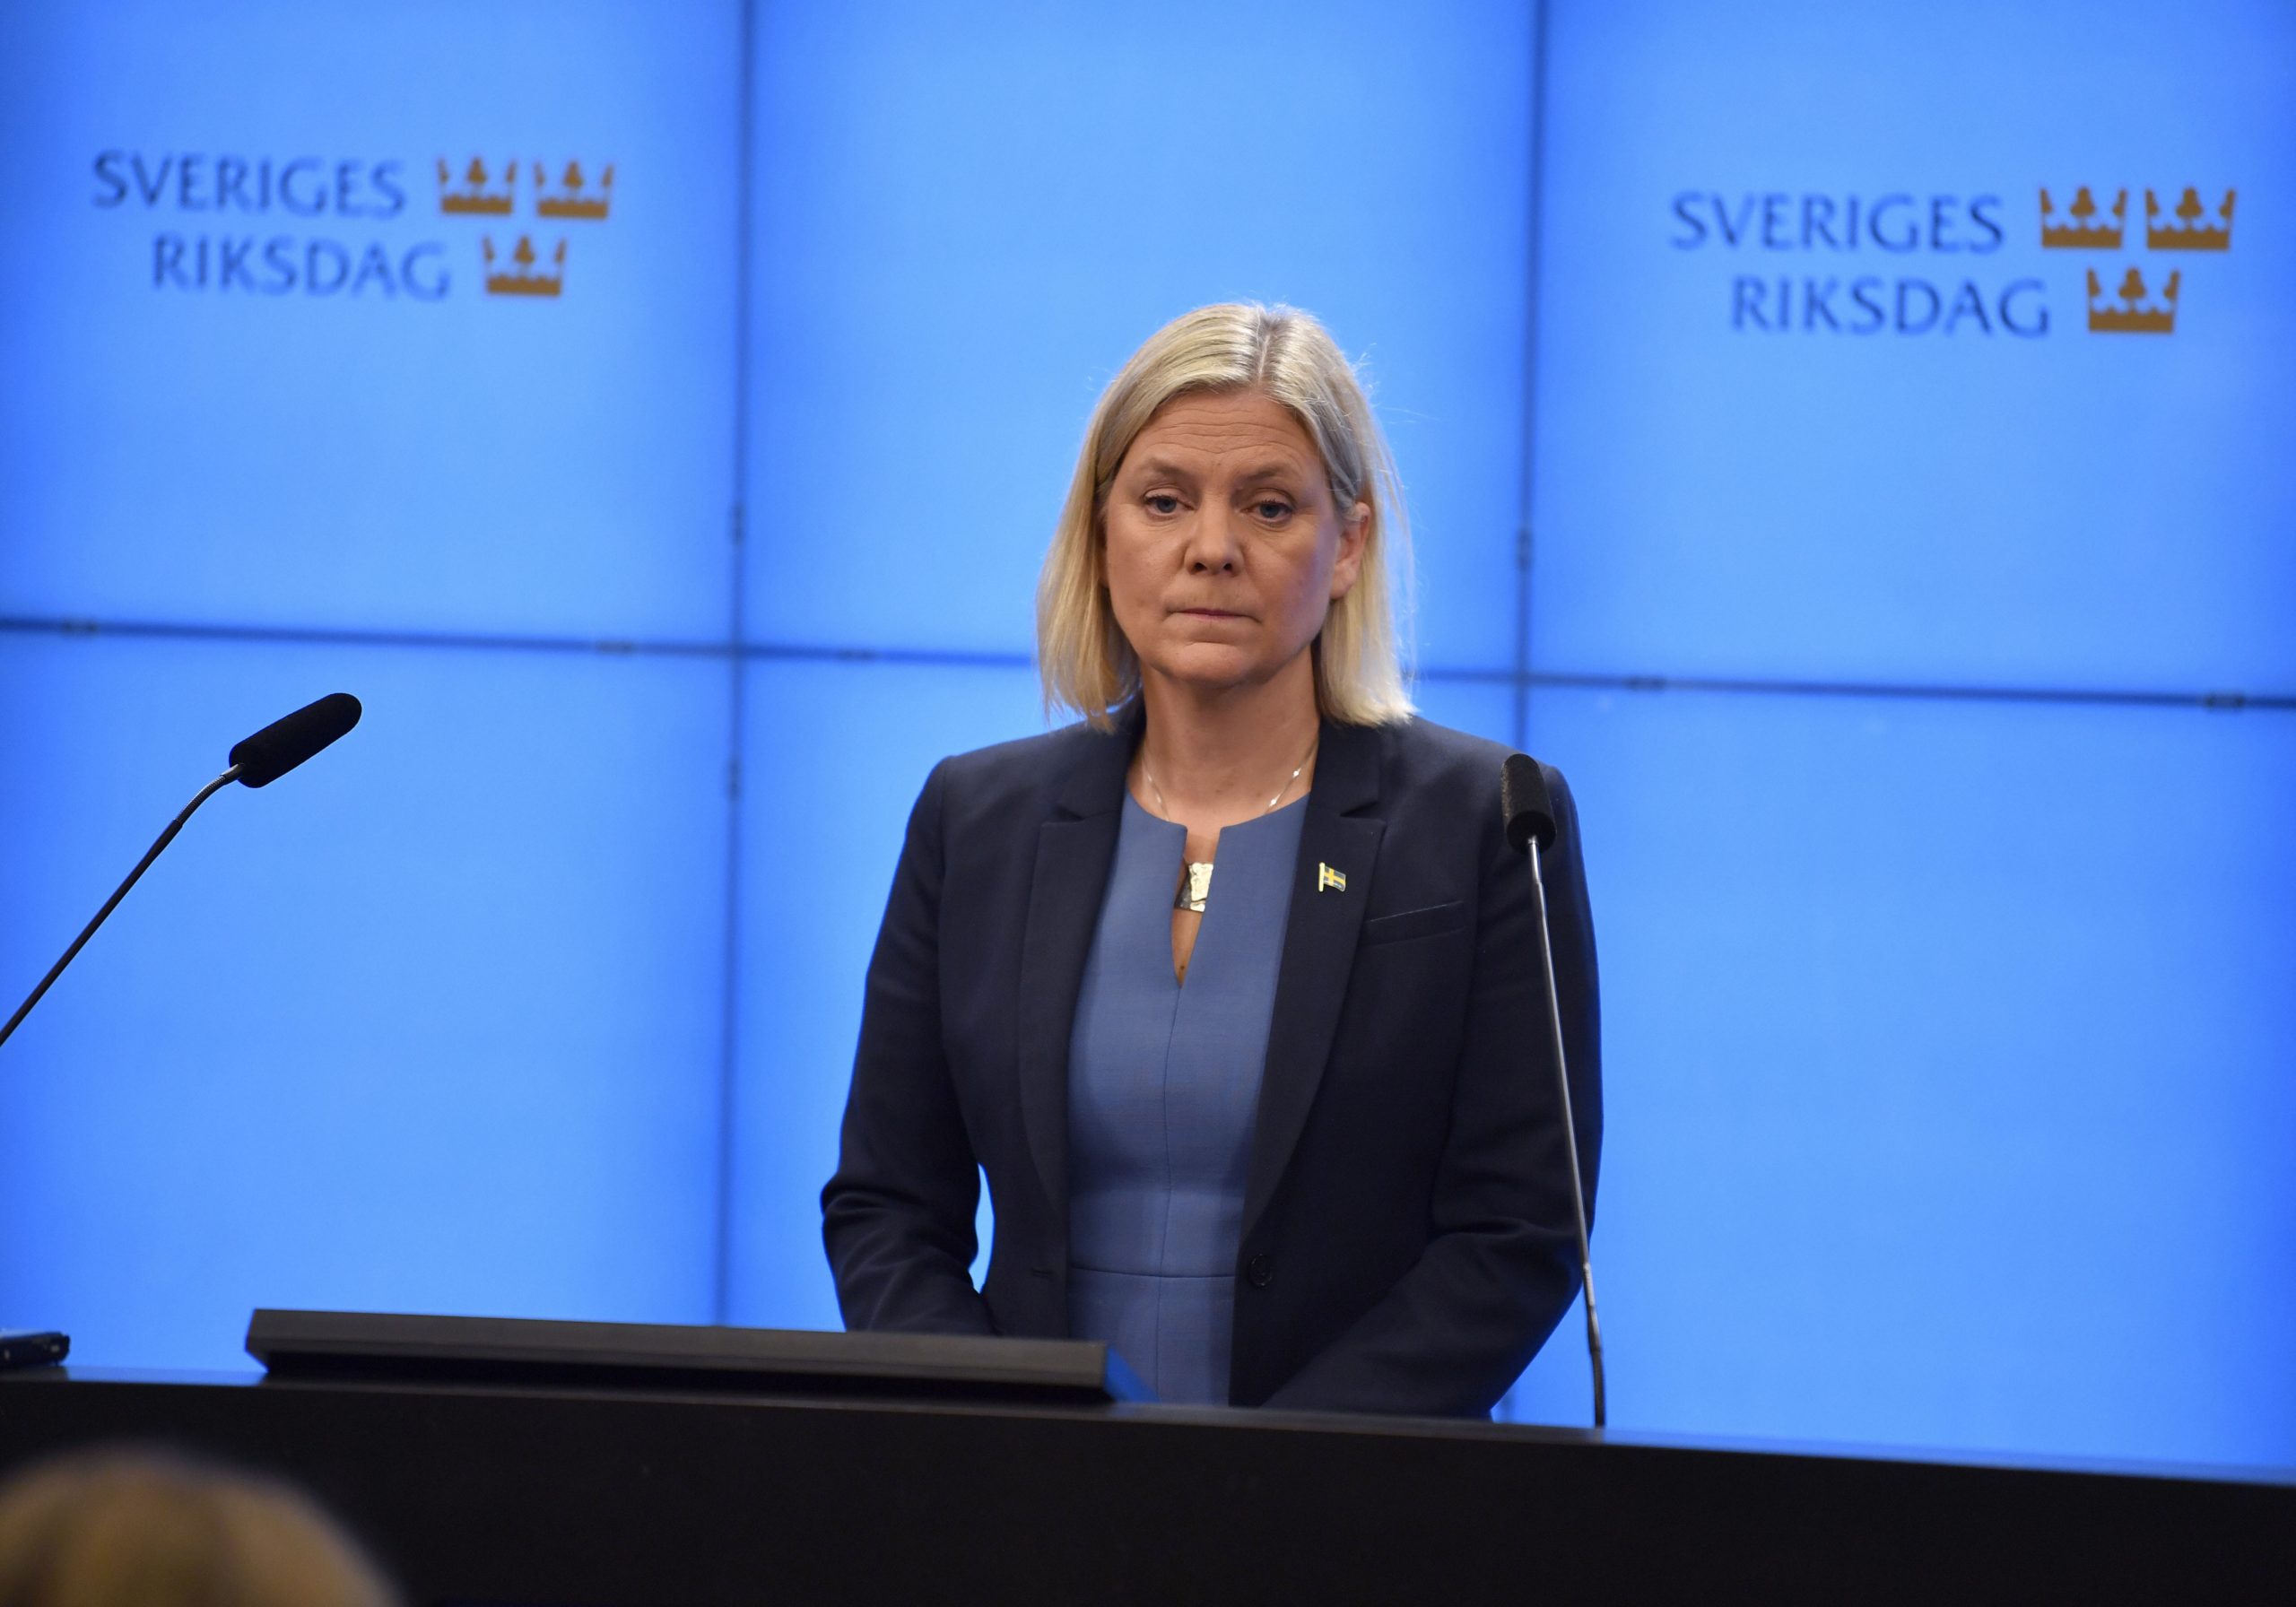 Why did Magdalena Andersson, Swedens 1st woman Prime Minister, step down?